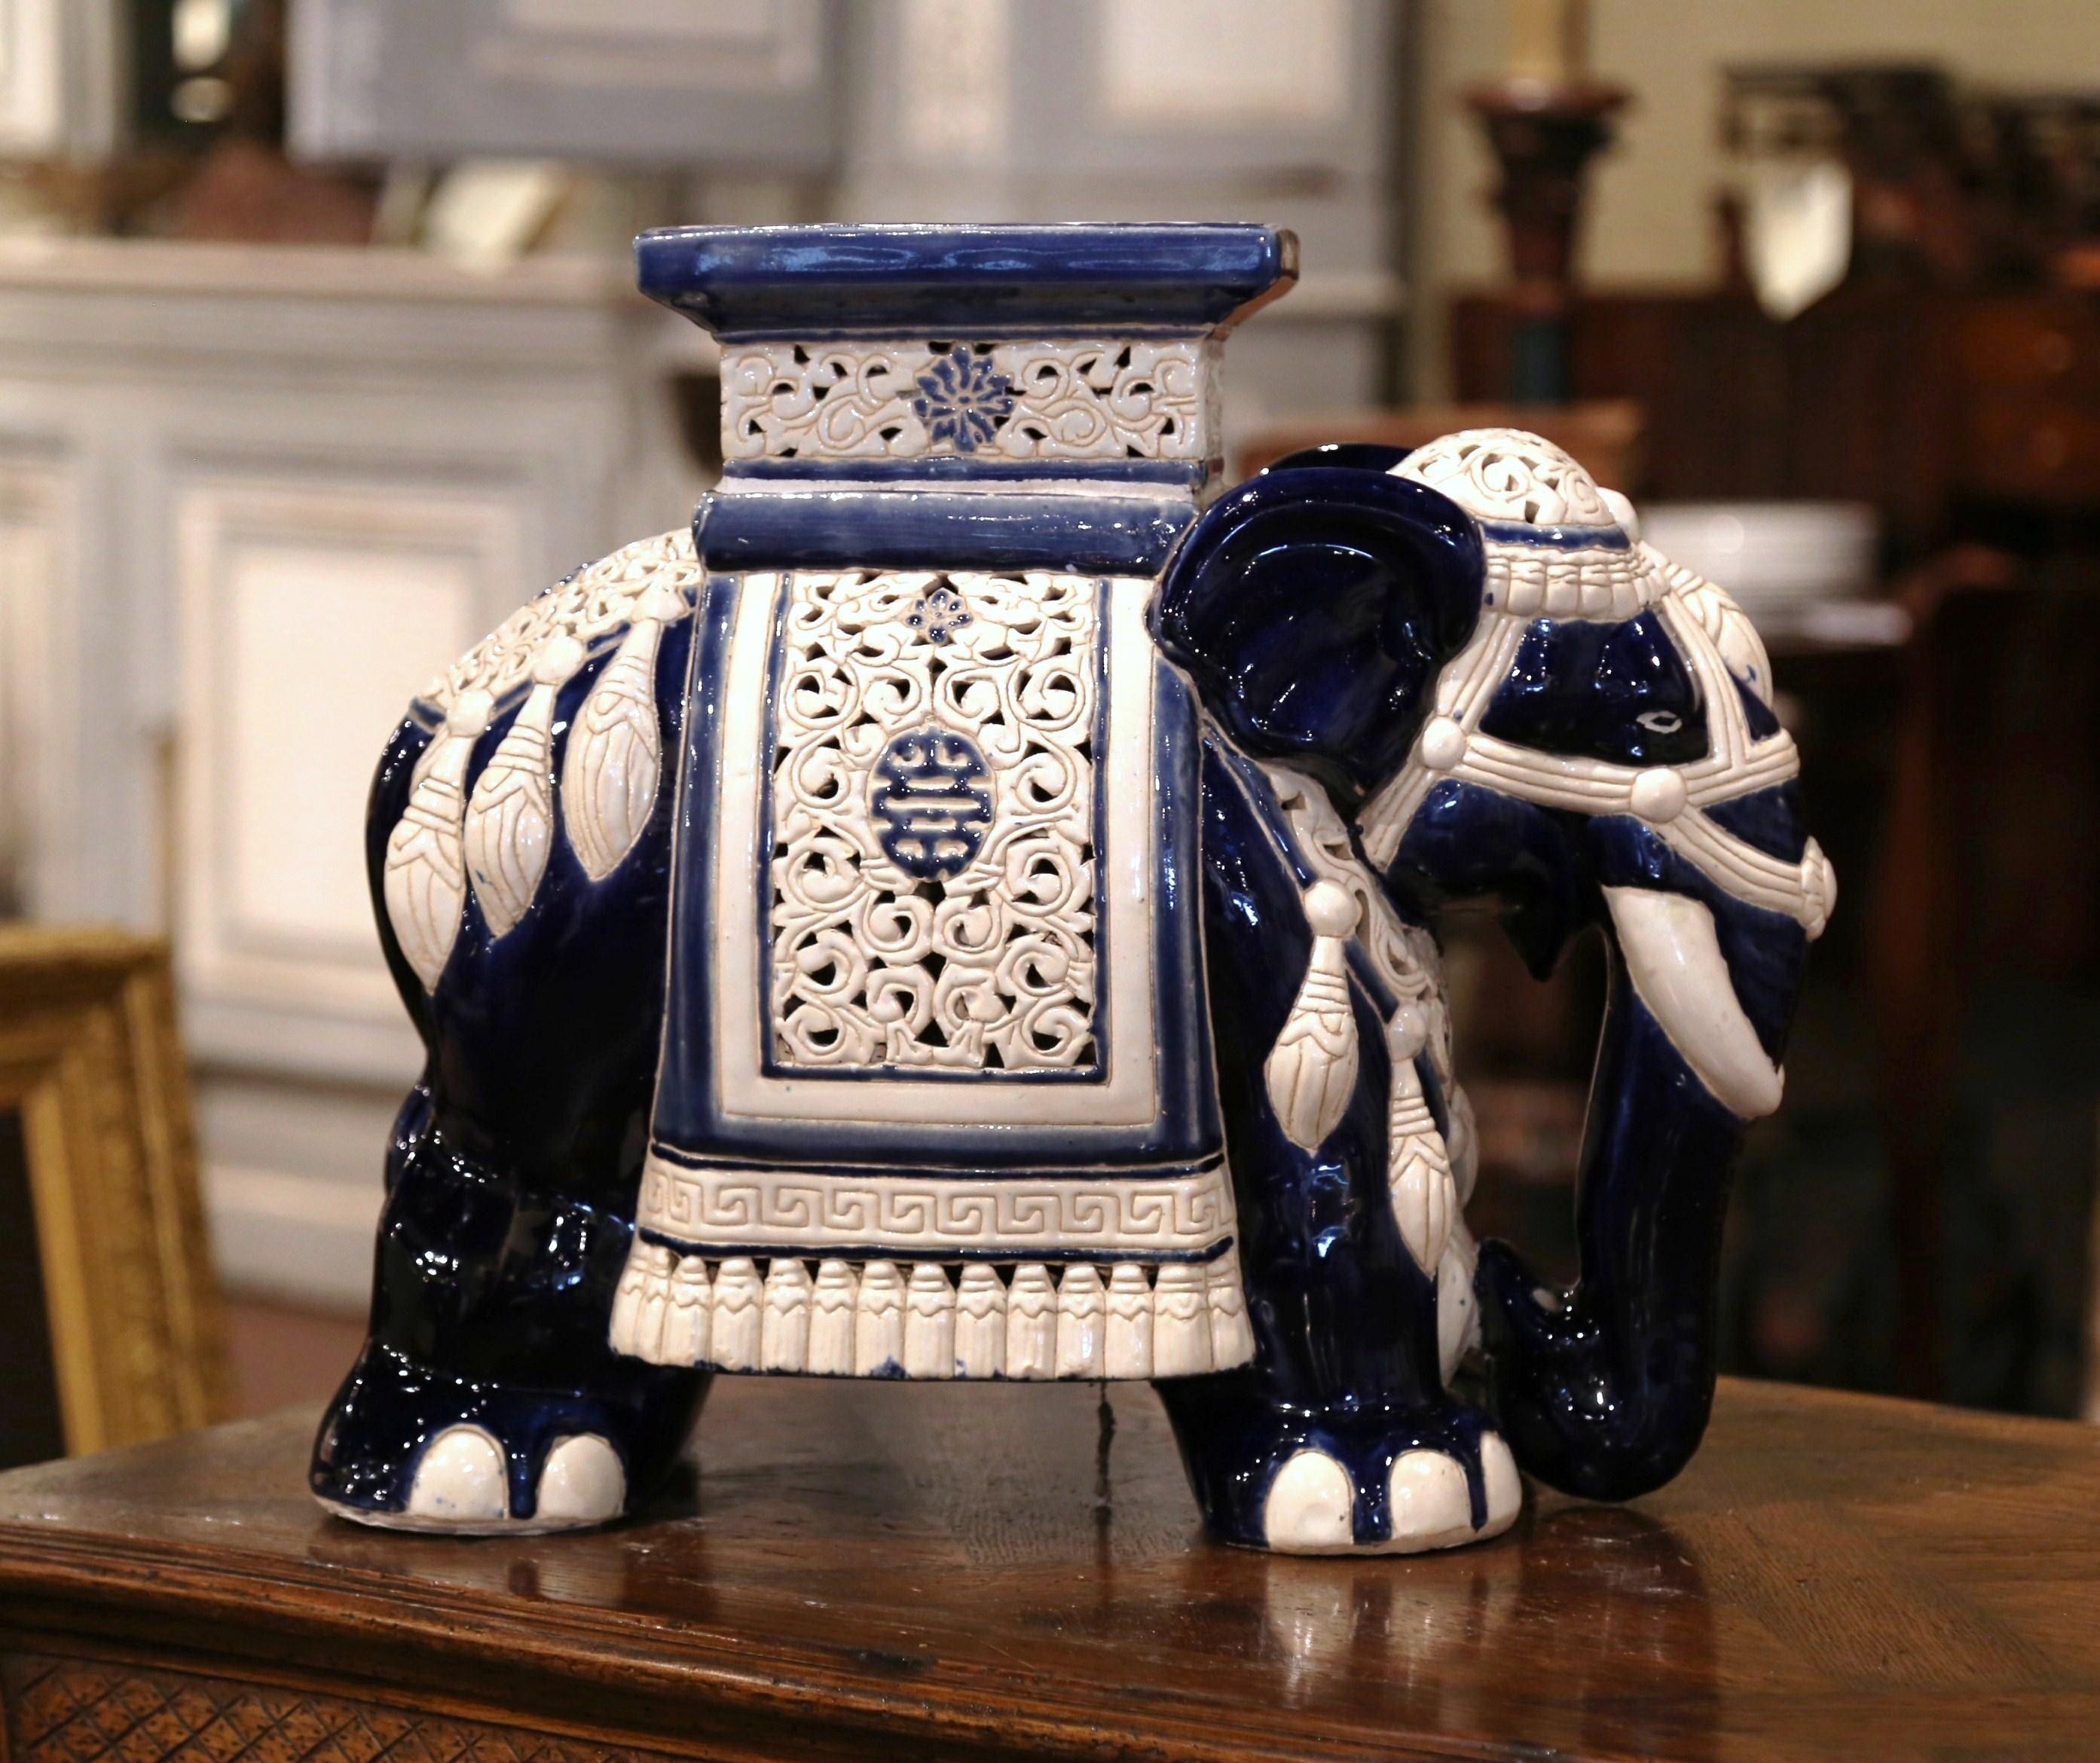 This interesting, porcelain garden seat was found in France. Crafted, circa 1950, the faience seating is in the shape of an elephant, which is heavily decorated in oriental finery. The mammal has a rectangular seat at the top, and is hand painted in